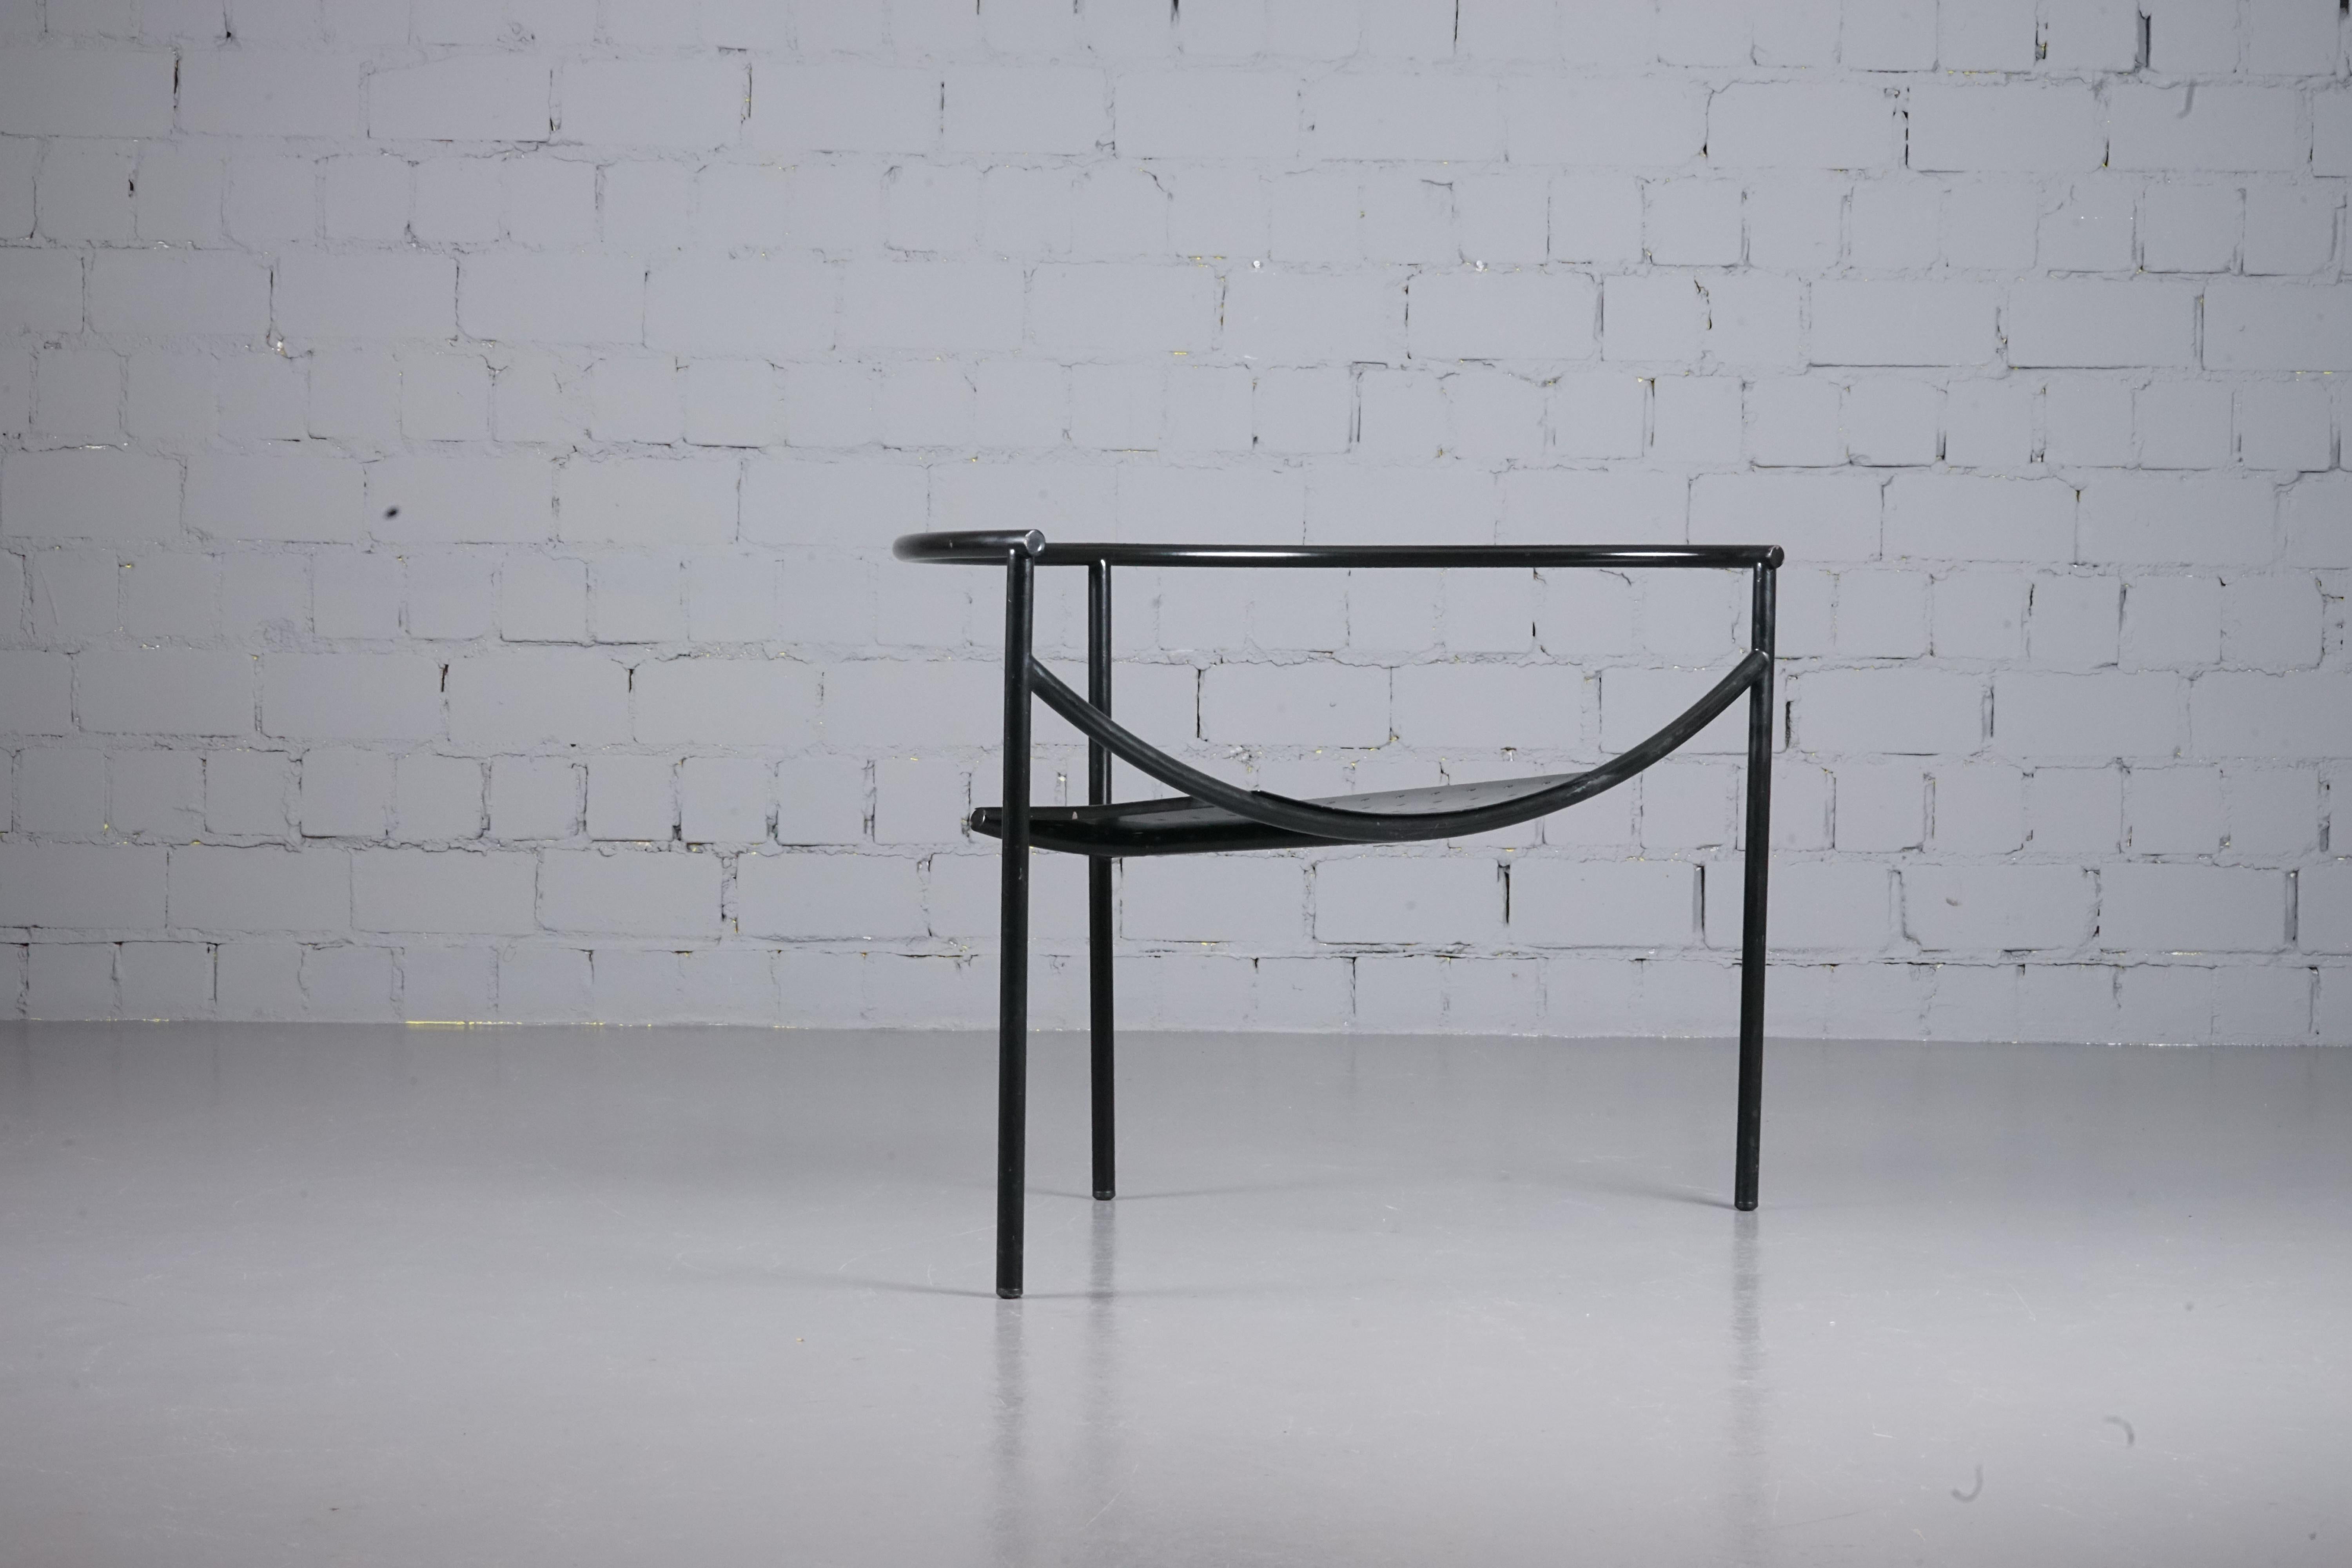 Powder-Coated Dr. Sonderbar Postmodern Chair by Philippe Starck 1st Edition For Sale